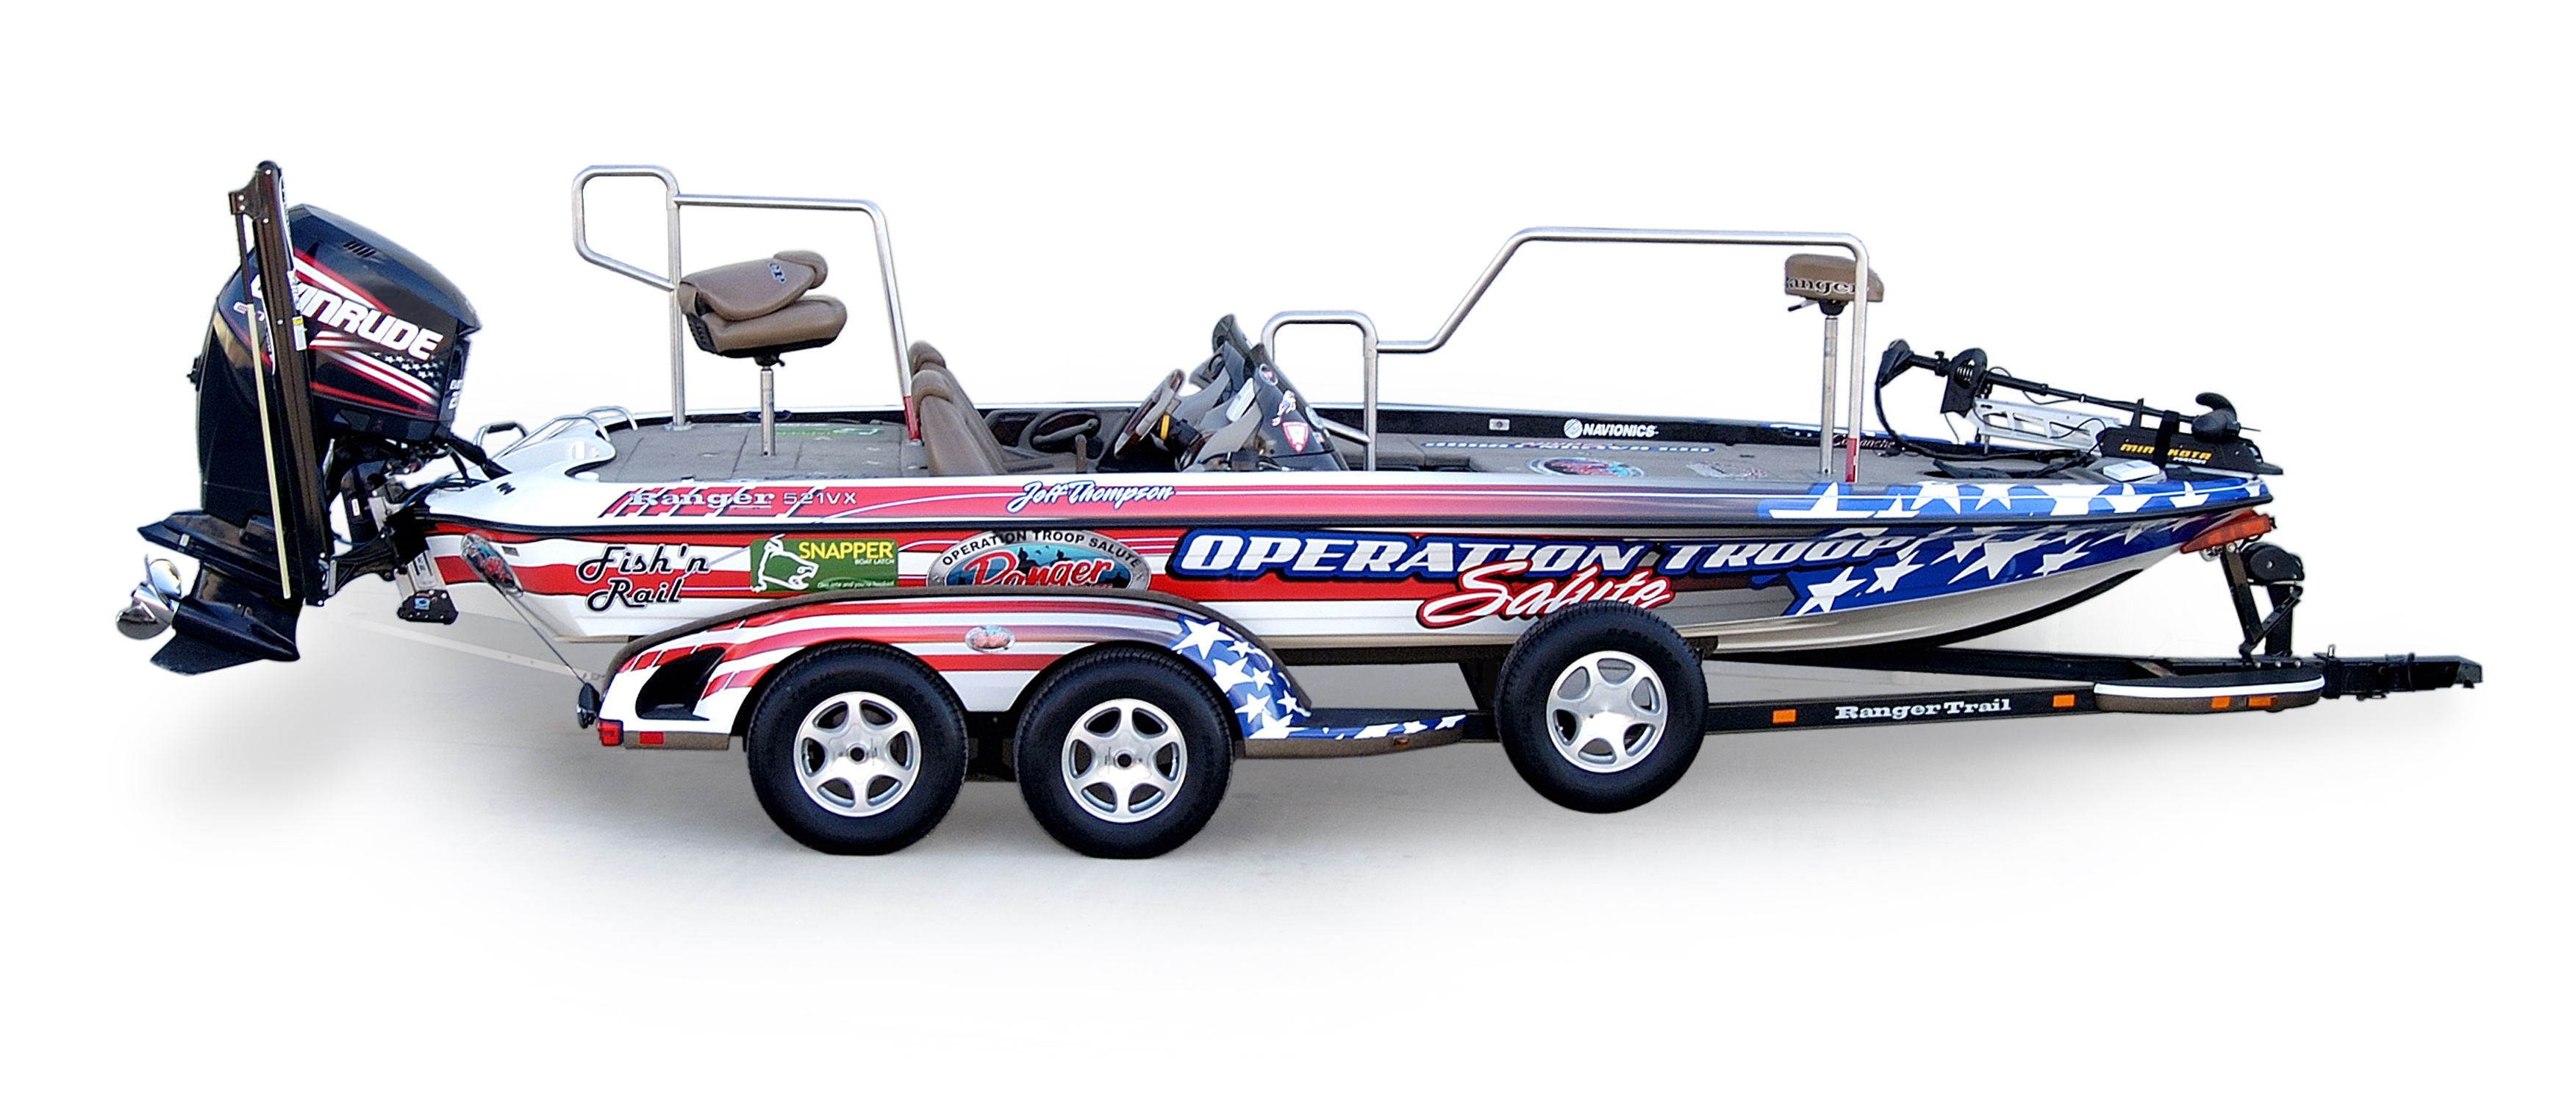 Rc boat launch -   Rc boats, Boat, Product launch